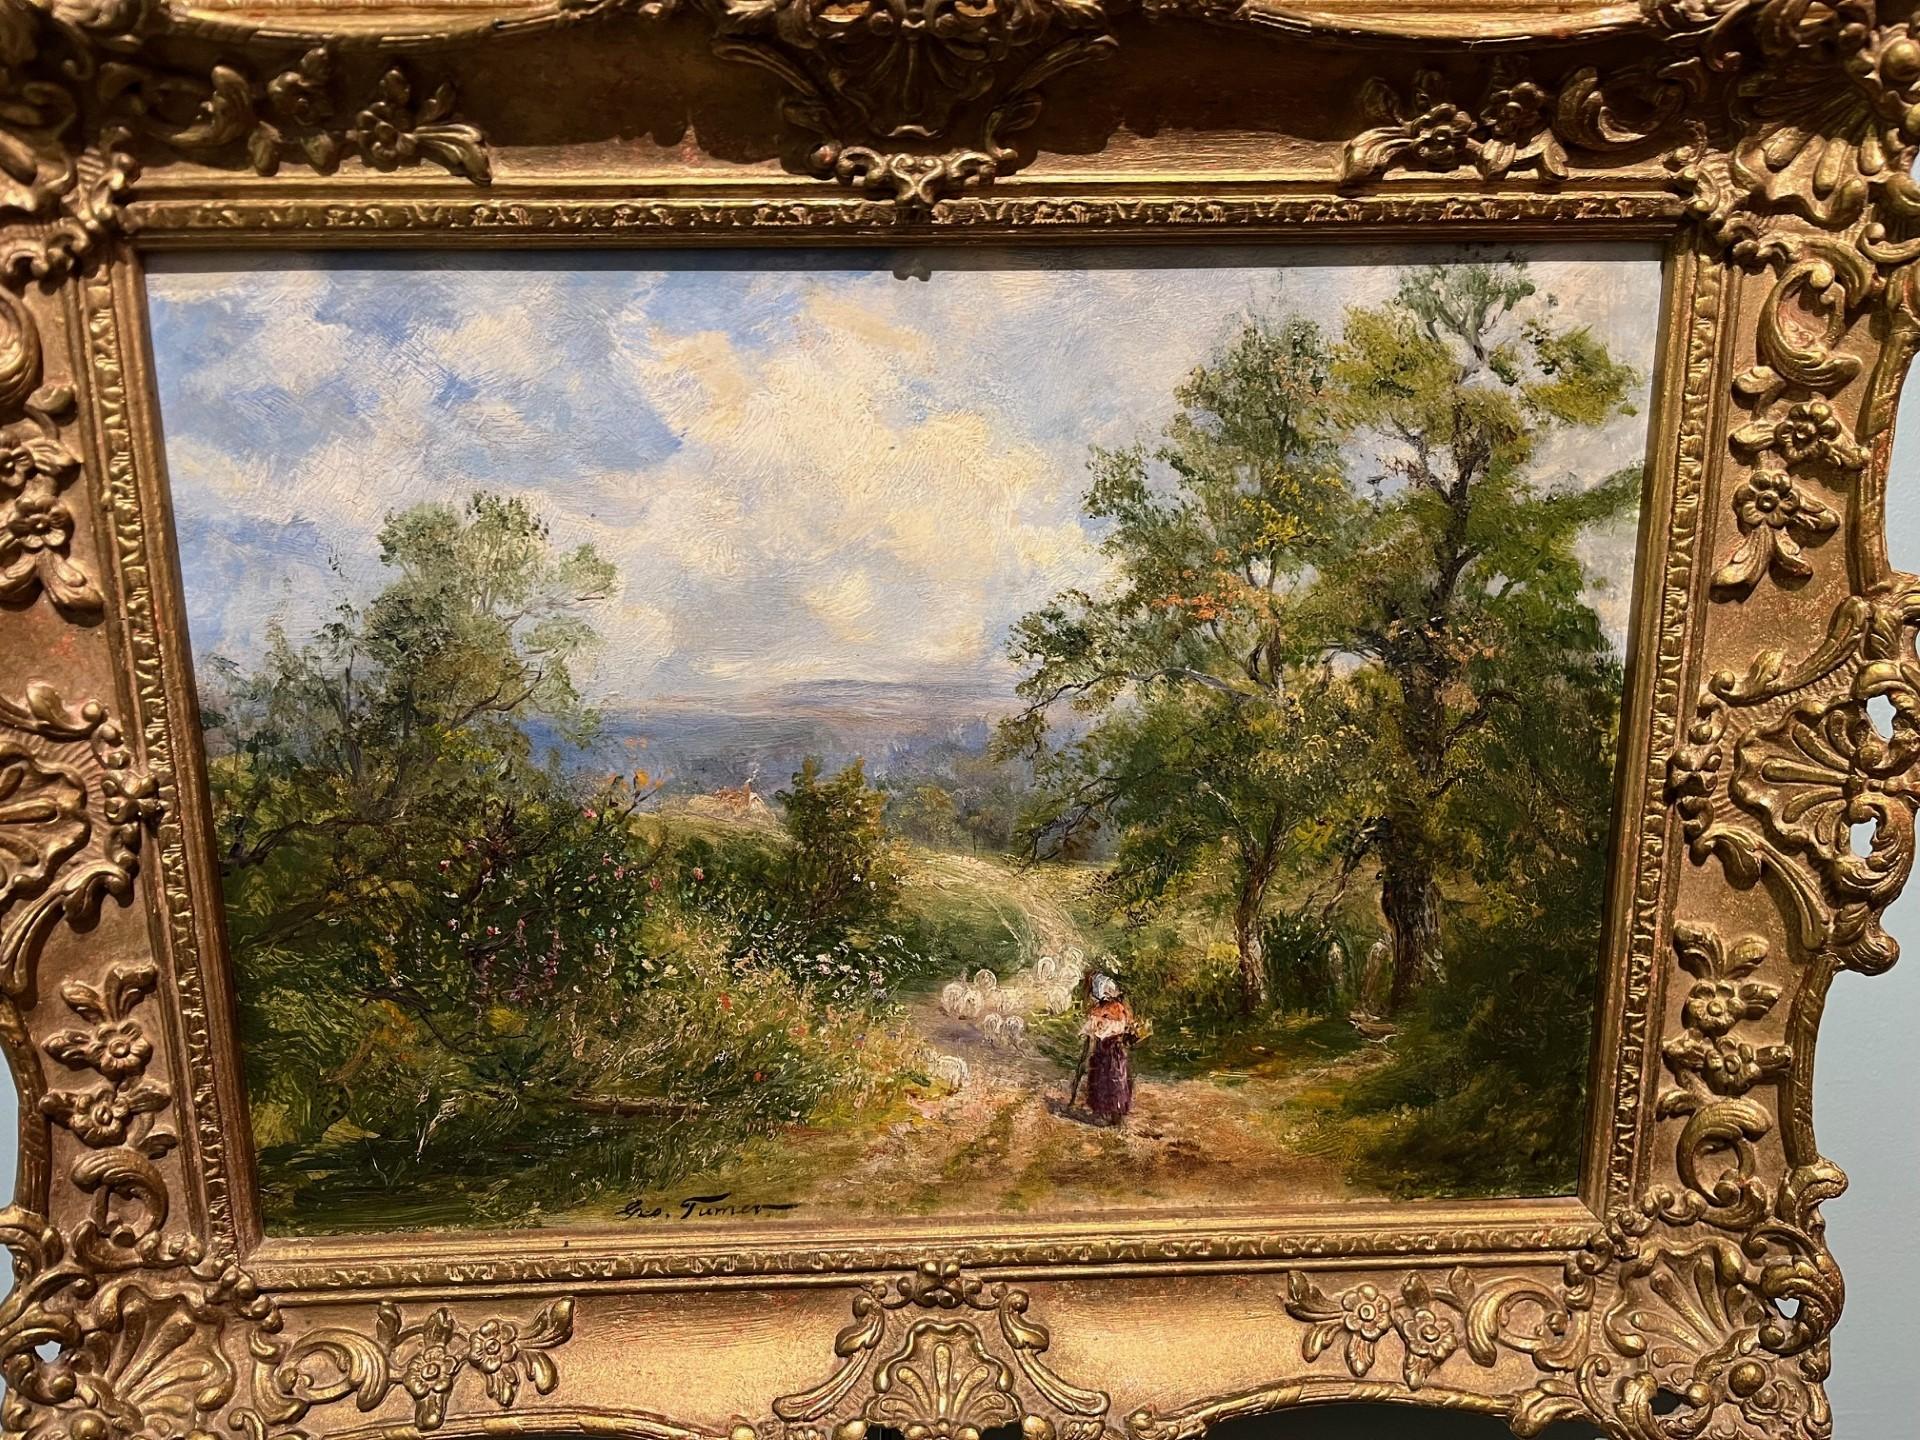 Small bucolic oil on panel by Victorian Painter George Turner.
A rare treat to have such a little beauty by this much sought after artist.   English landscape artist and farmer who is often referred to as  